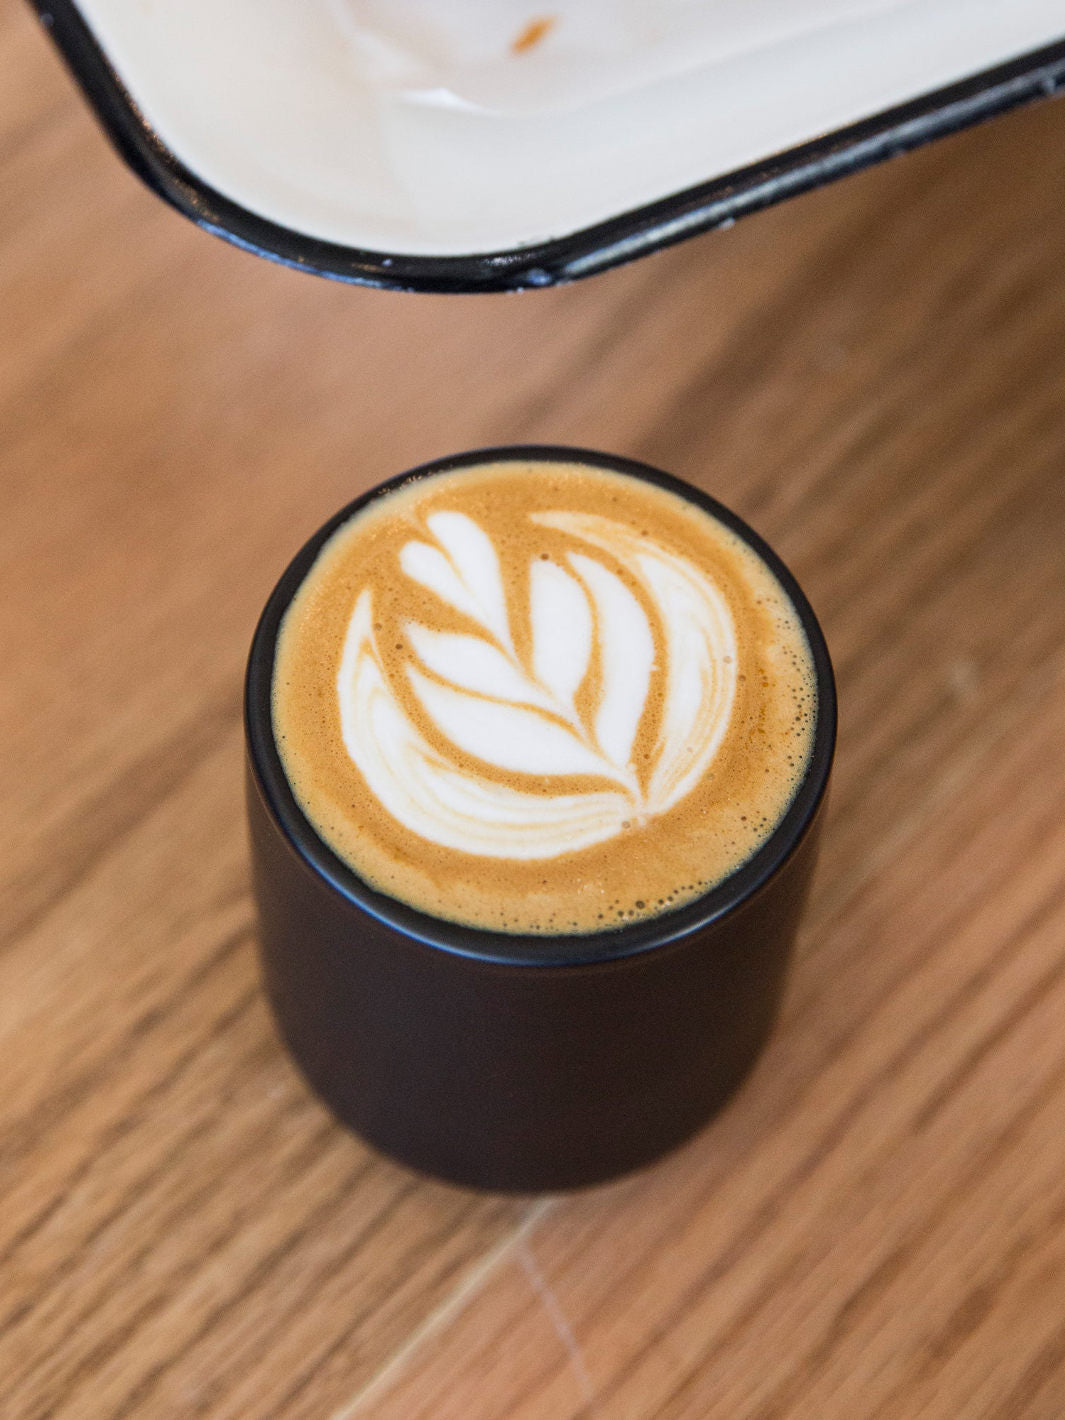 One Espresso/cortado Cup with or Without Handle: Blue-grey/white